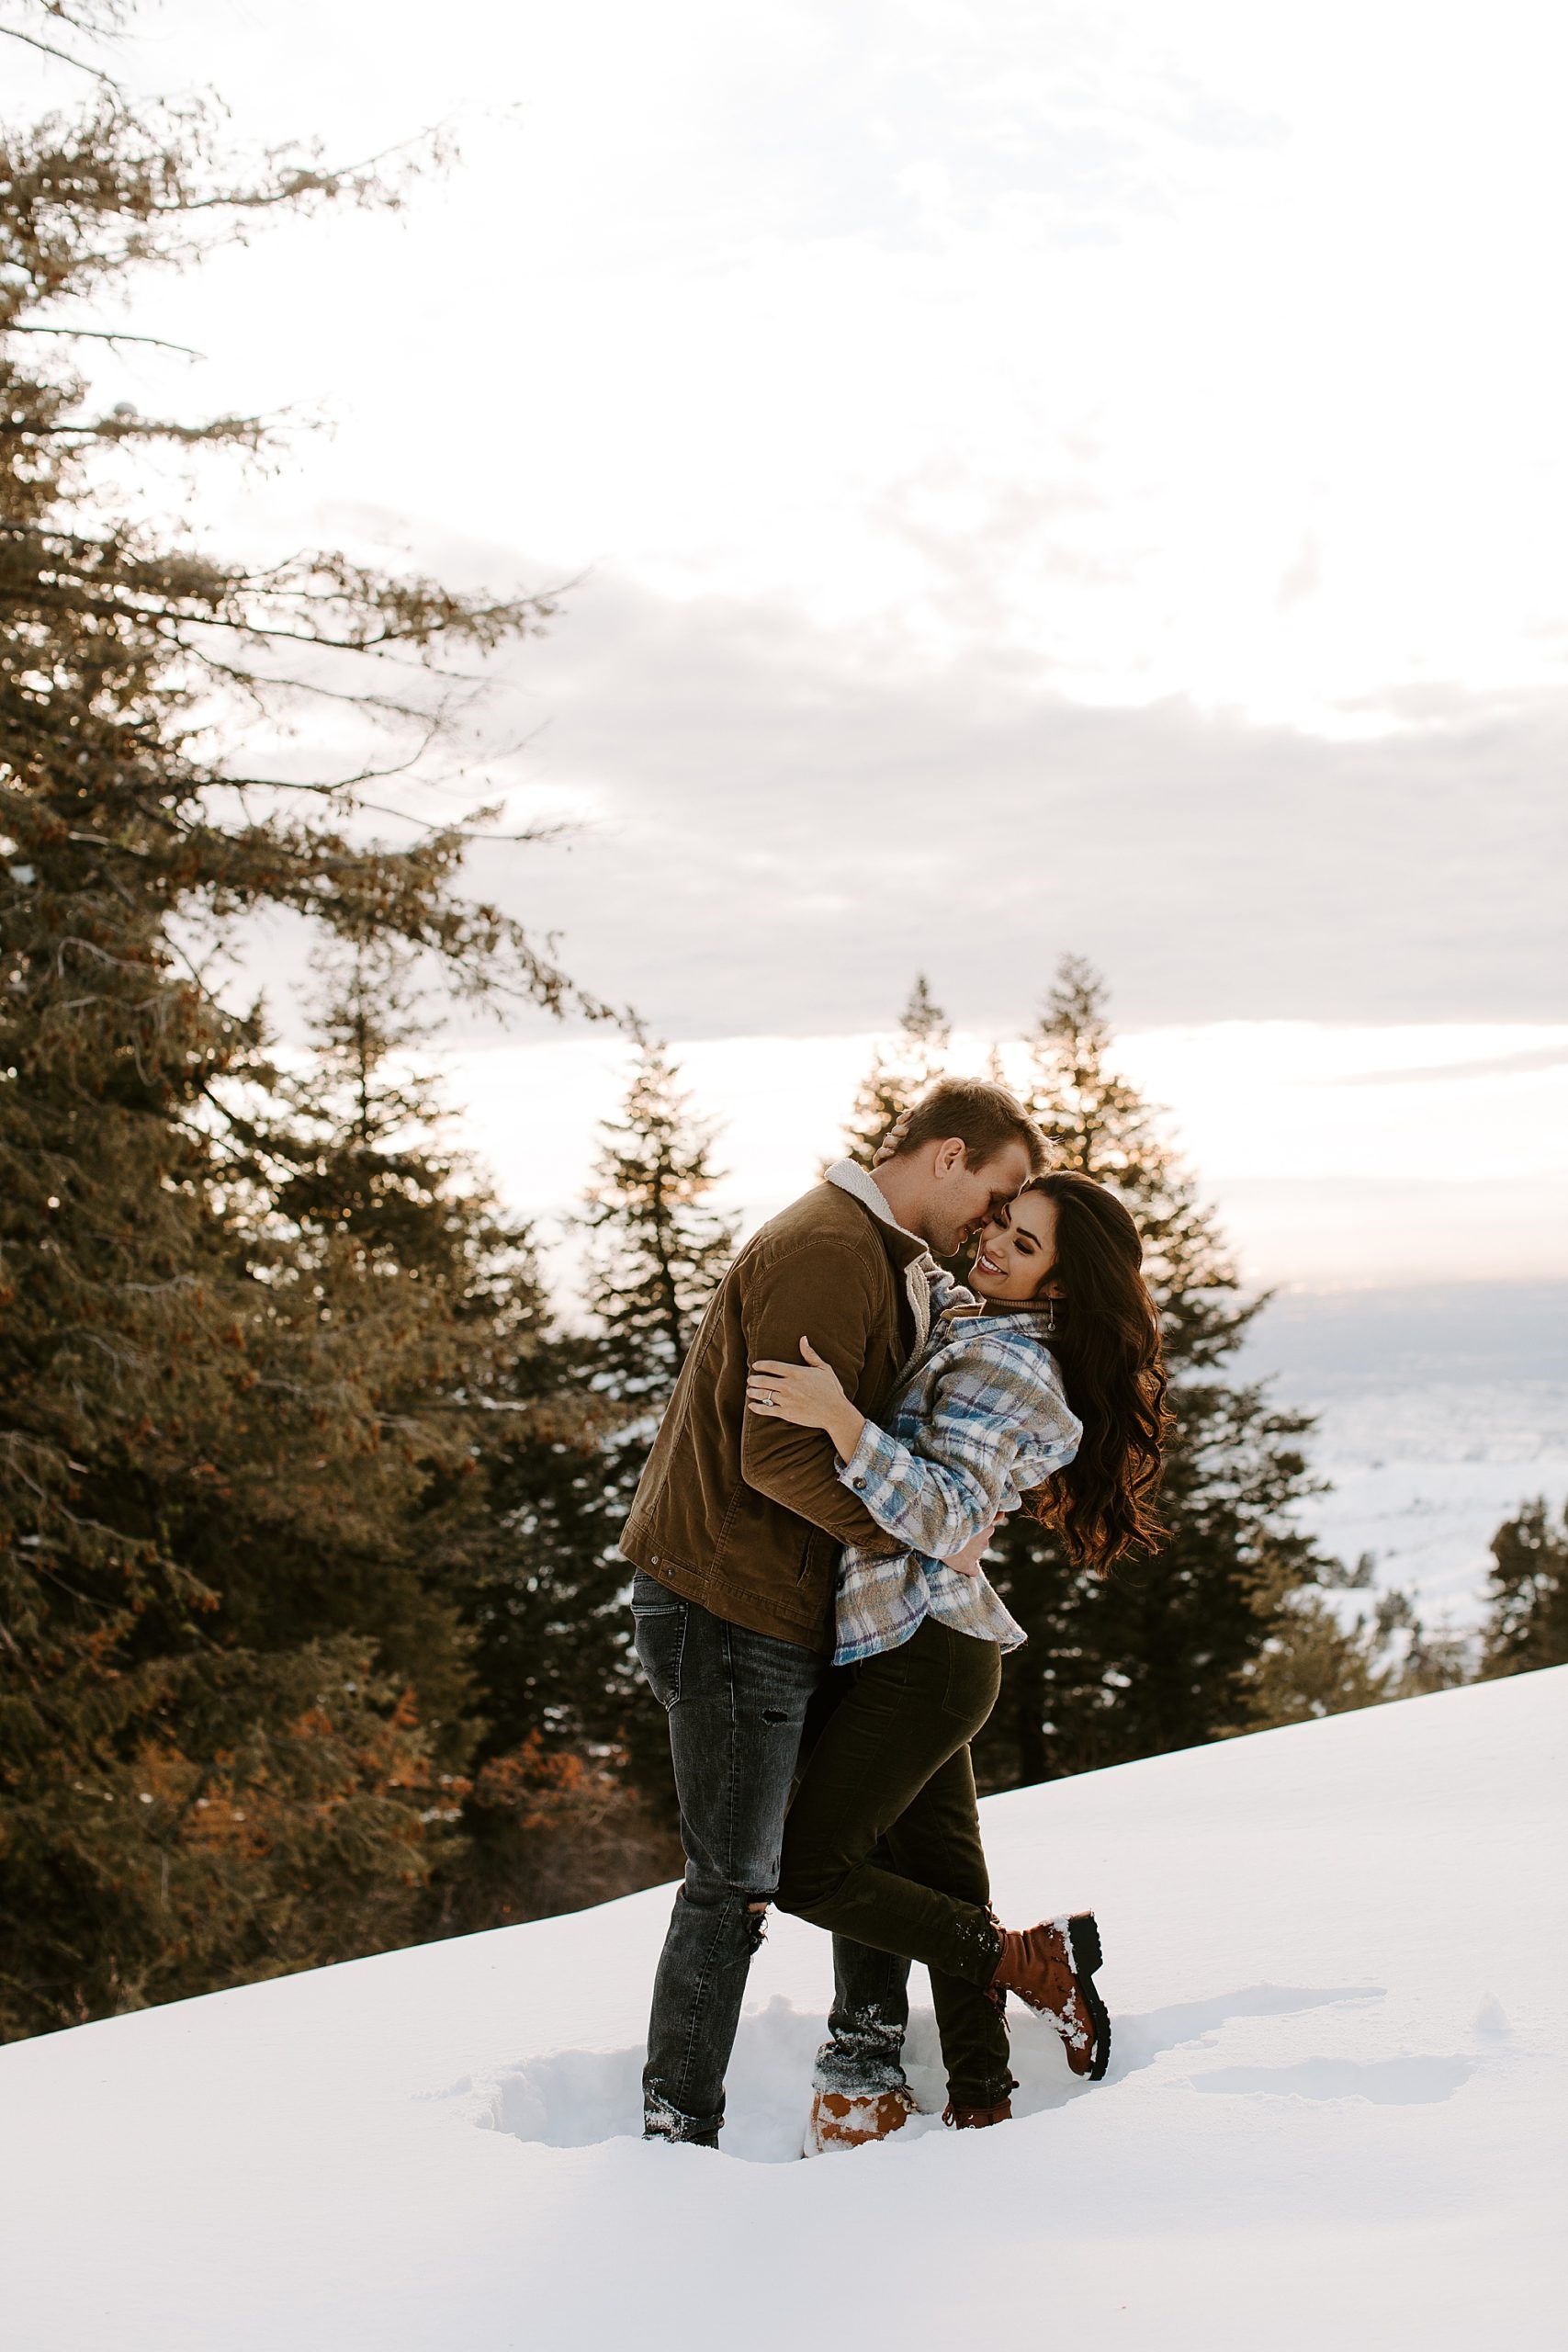 snowy engagement session, snowy engagement photoshoot, snowy couple pictures, snowy couple photos, snowy couple, snowy couple aesthetic, snowy couple photography, snowy mountain couple photos, snowy mountains couple photography, stack rock idaho, sawtooth mountains idaho, sawtooth mountains, sawtooth mountains engagement session, sawtooth mountains engagement photos, boise idaho, boise idaho engagement session, boise engagement session, idaho engagement session, idaho couples session, idaho couples photography, plaid shirt outfits, engagement session, couples session, couples photoshoot, couples photography, couples photoshoot outfit ideas, couples photoshoot outfits, couple photos, couple photography, engagement photoshoot ideas